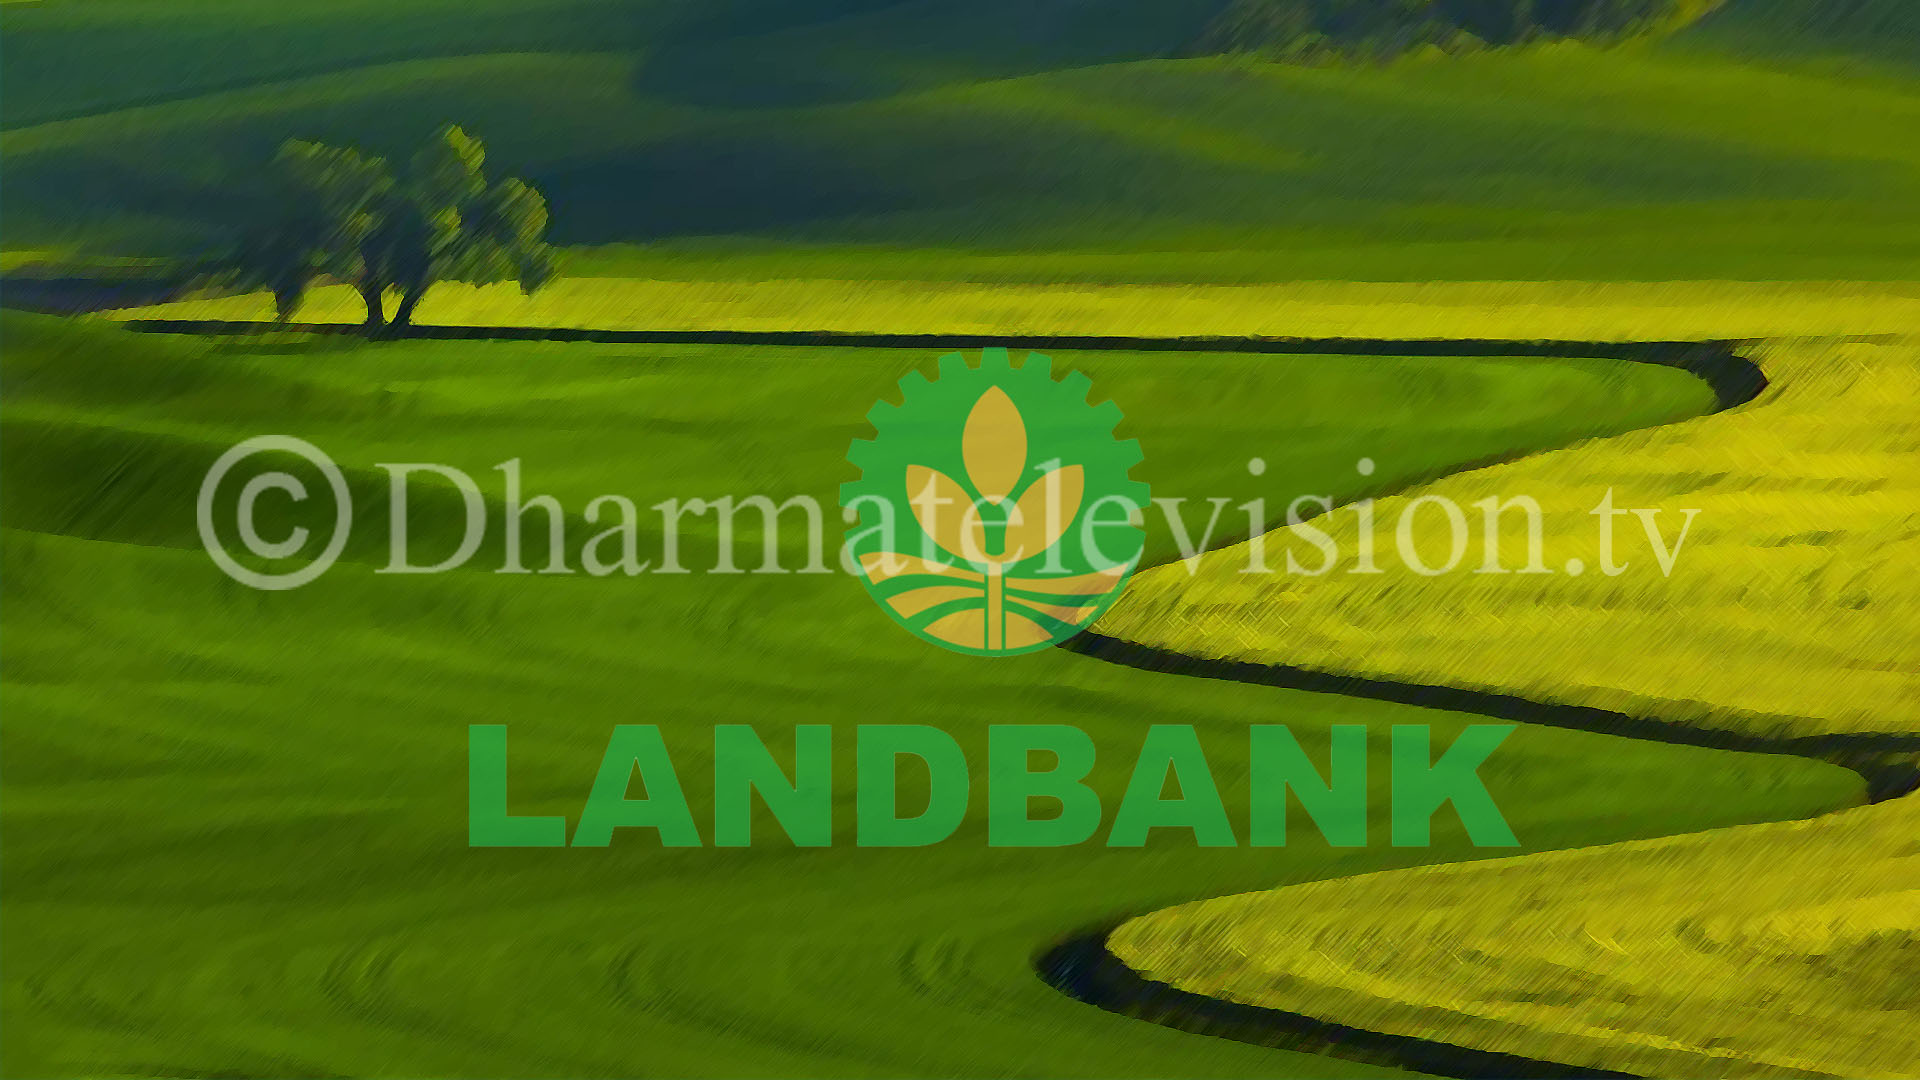 The concept of land bank will be implemented